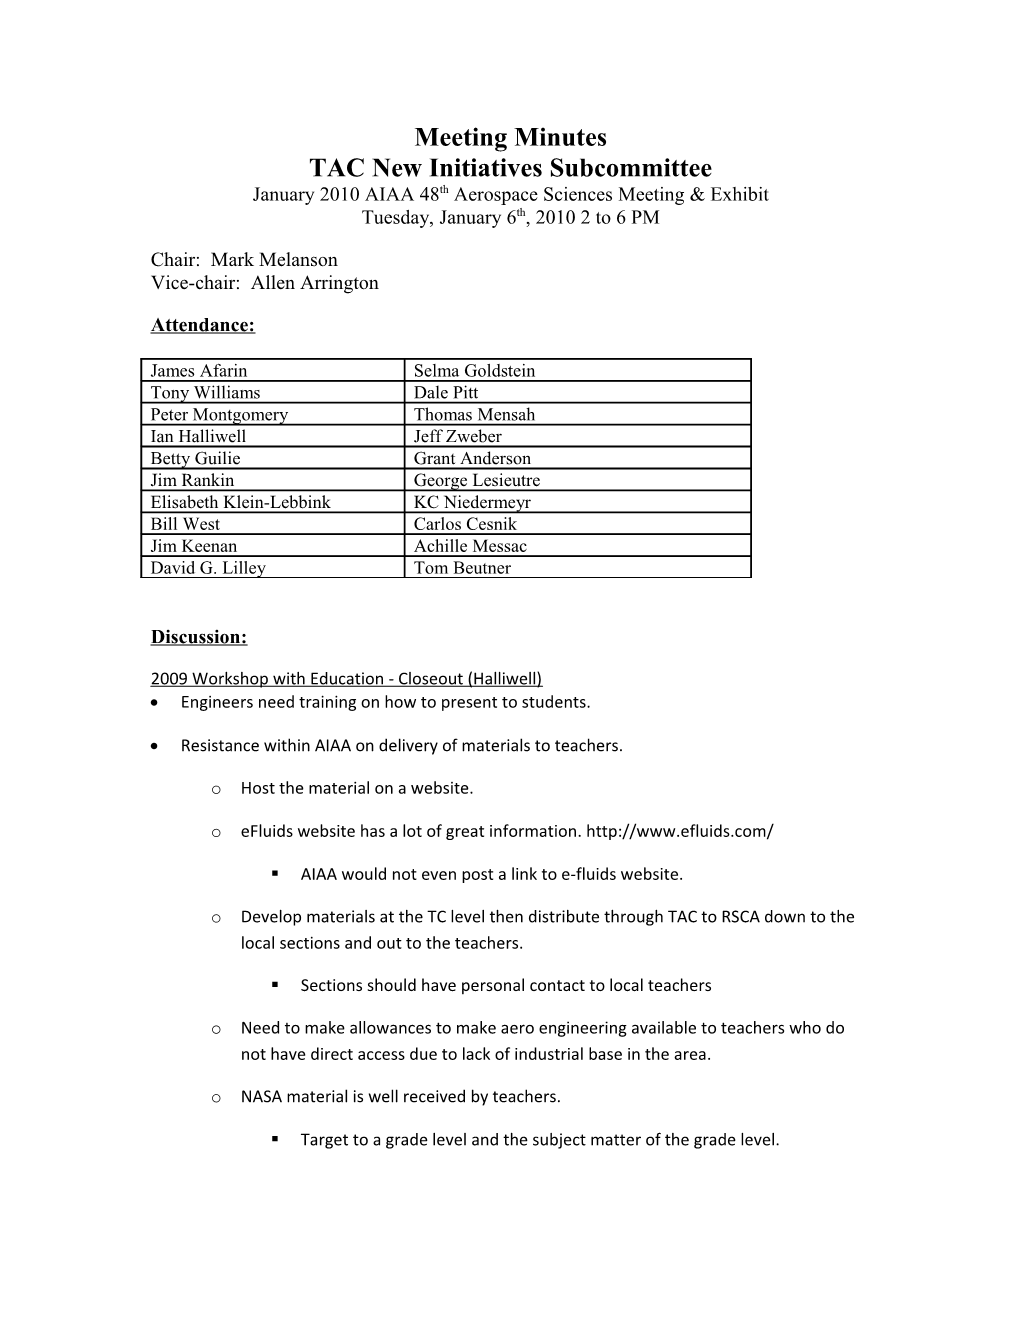 GTTC Meeting Minutes Template